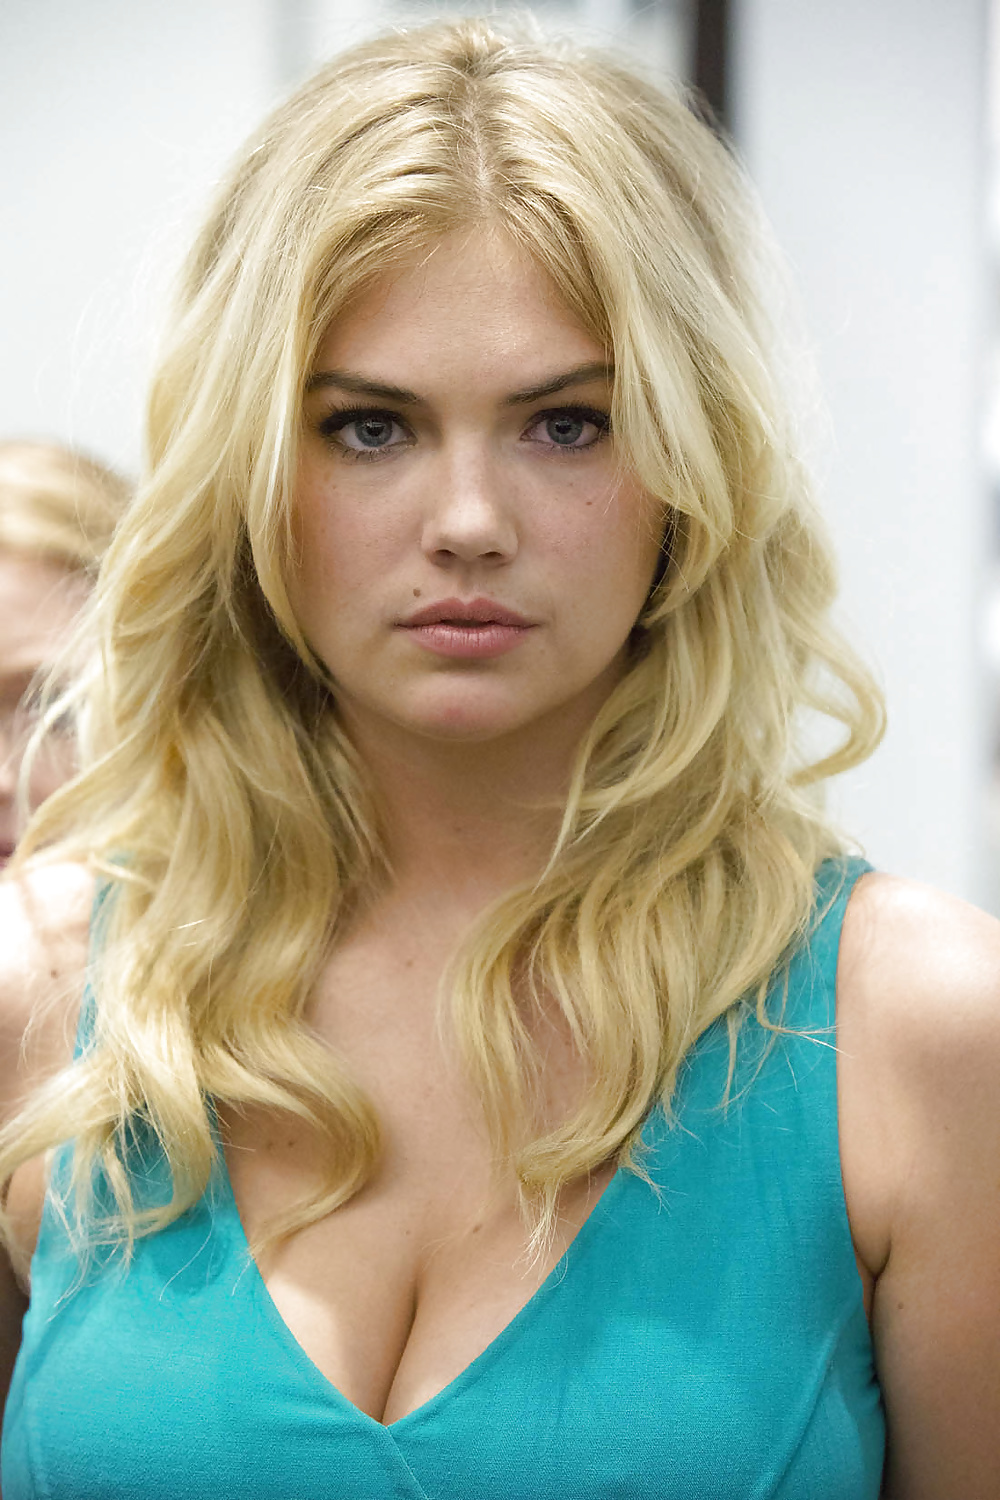 Kate Upton Ultimate Part 1 of 5 (CCM) #28427398